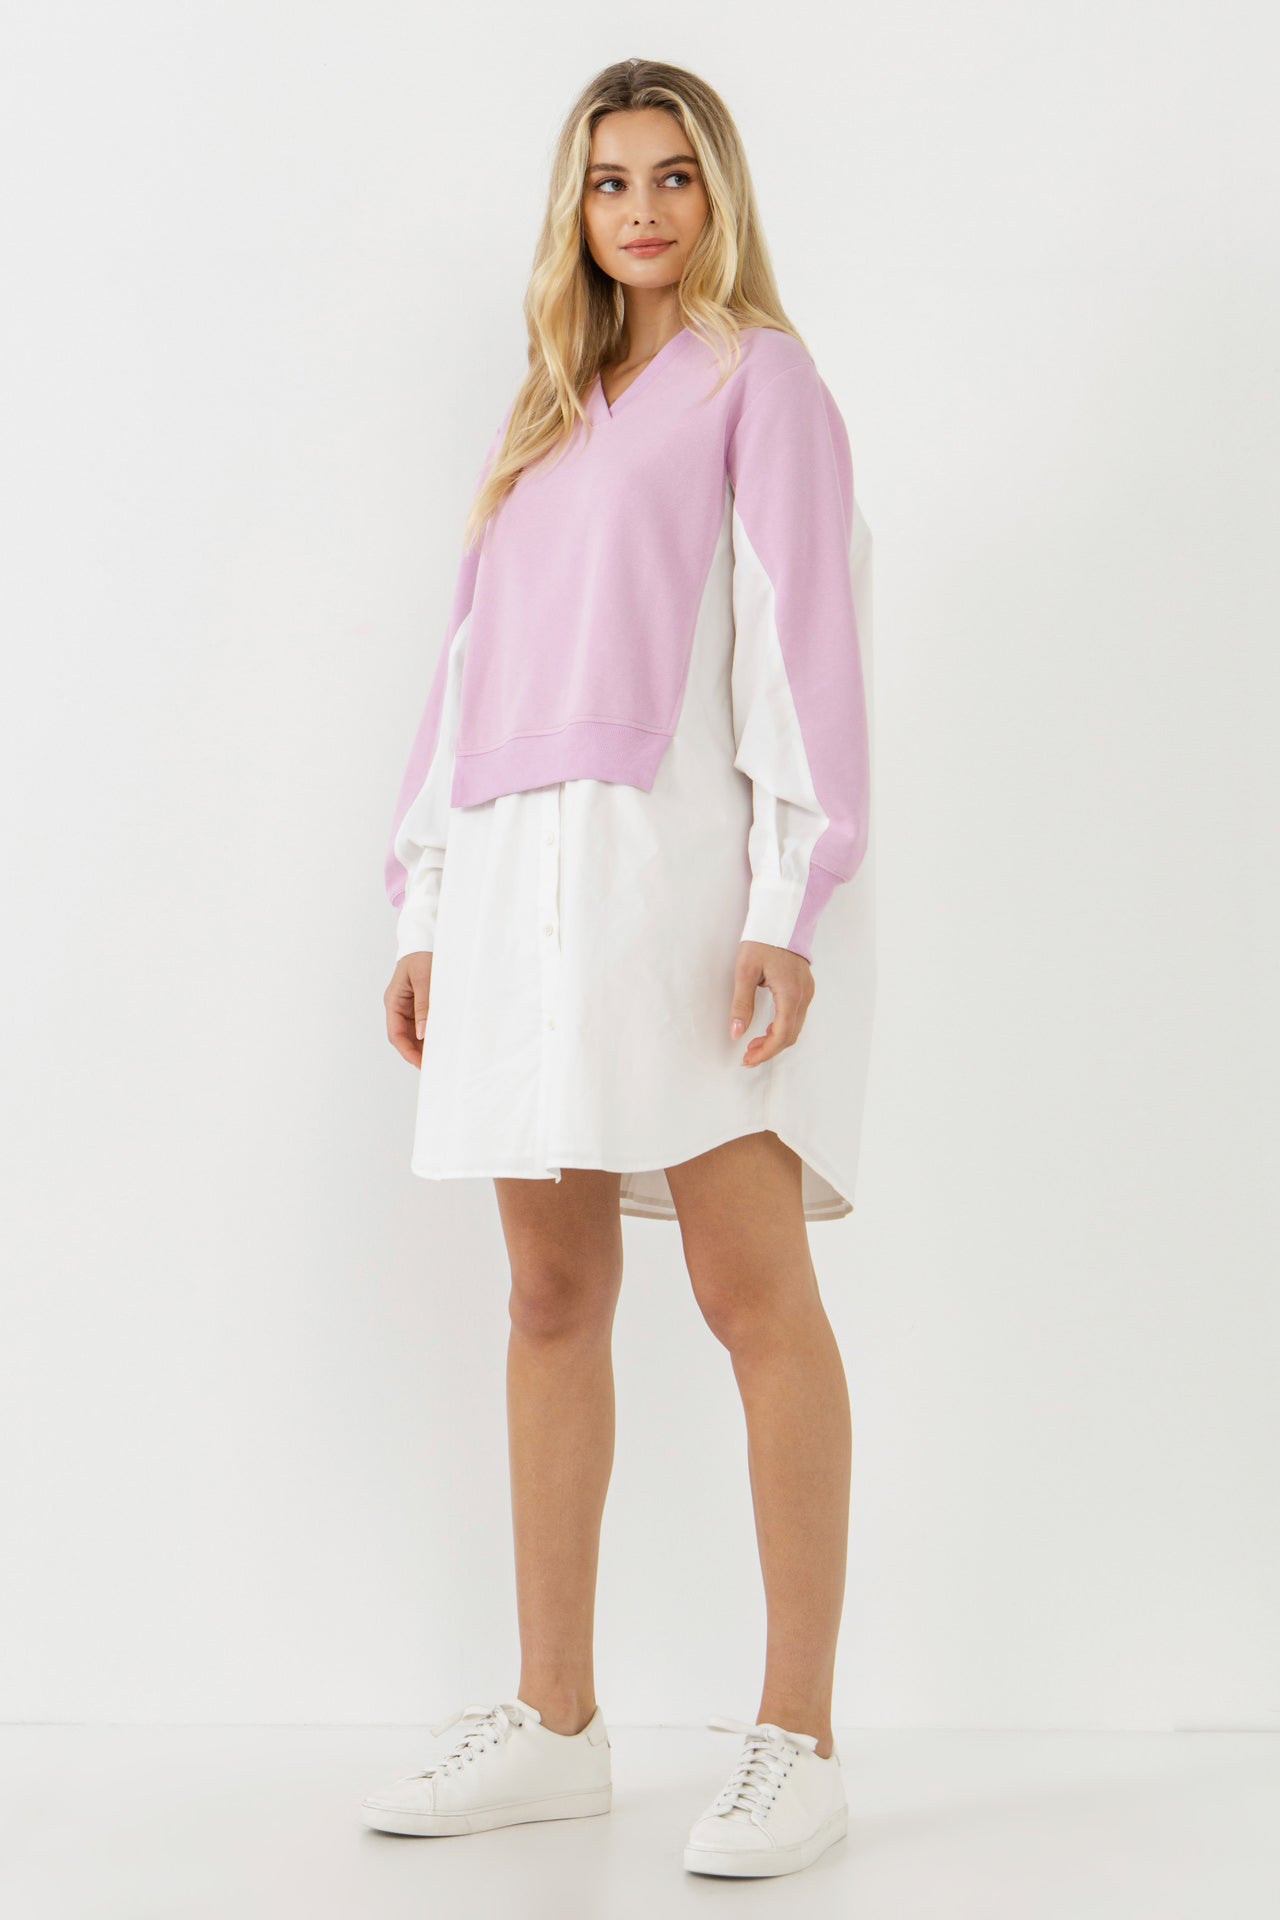 ENGLISH FACTORY - V-neck Sweatshirts Dress with Poplin - DRESSES available at Objectrare